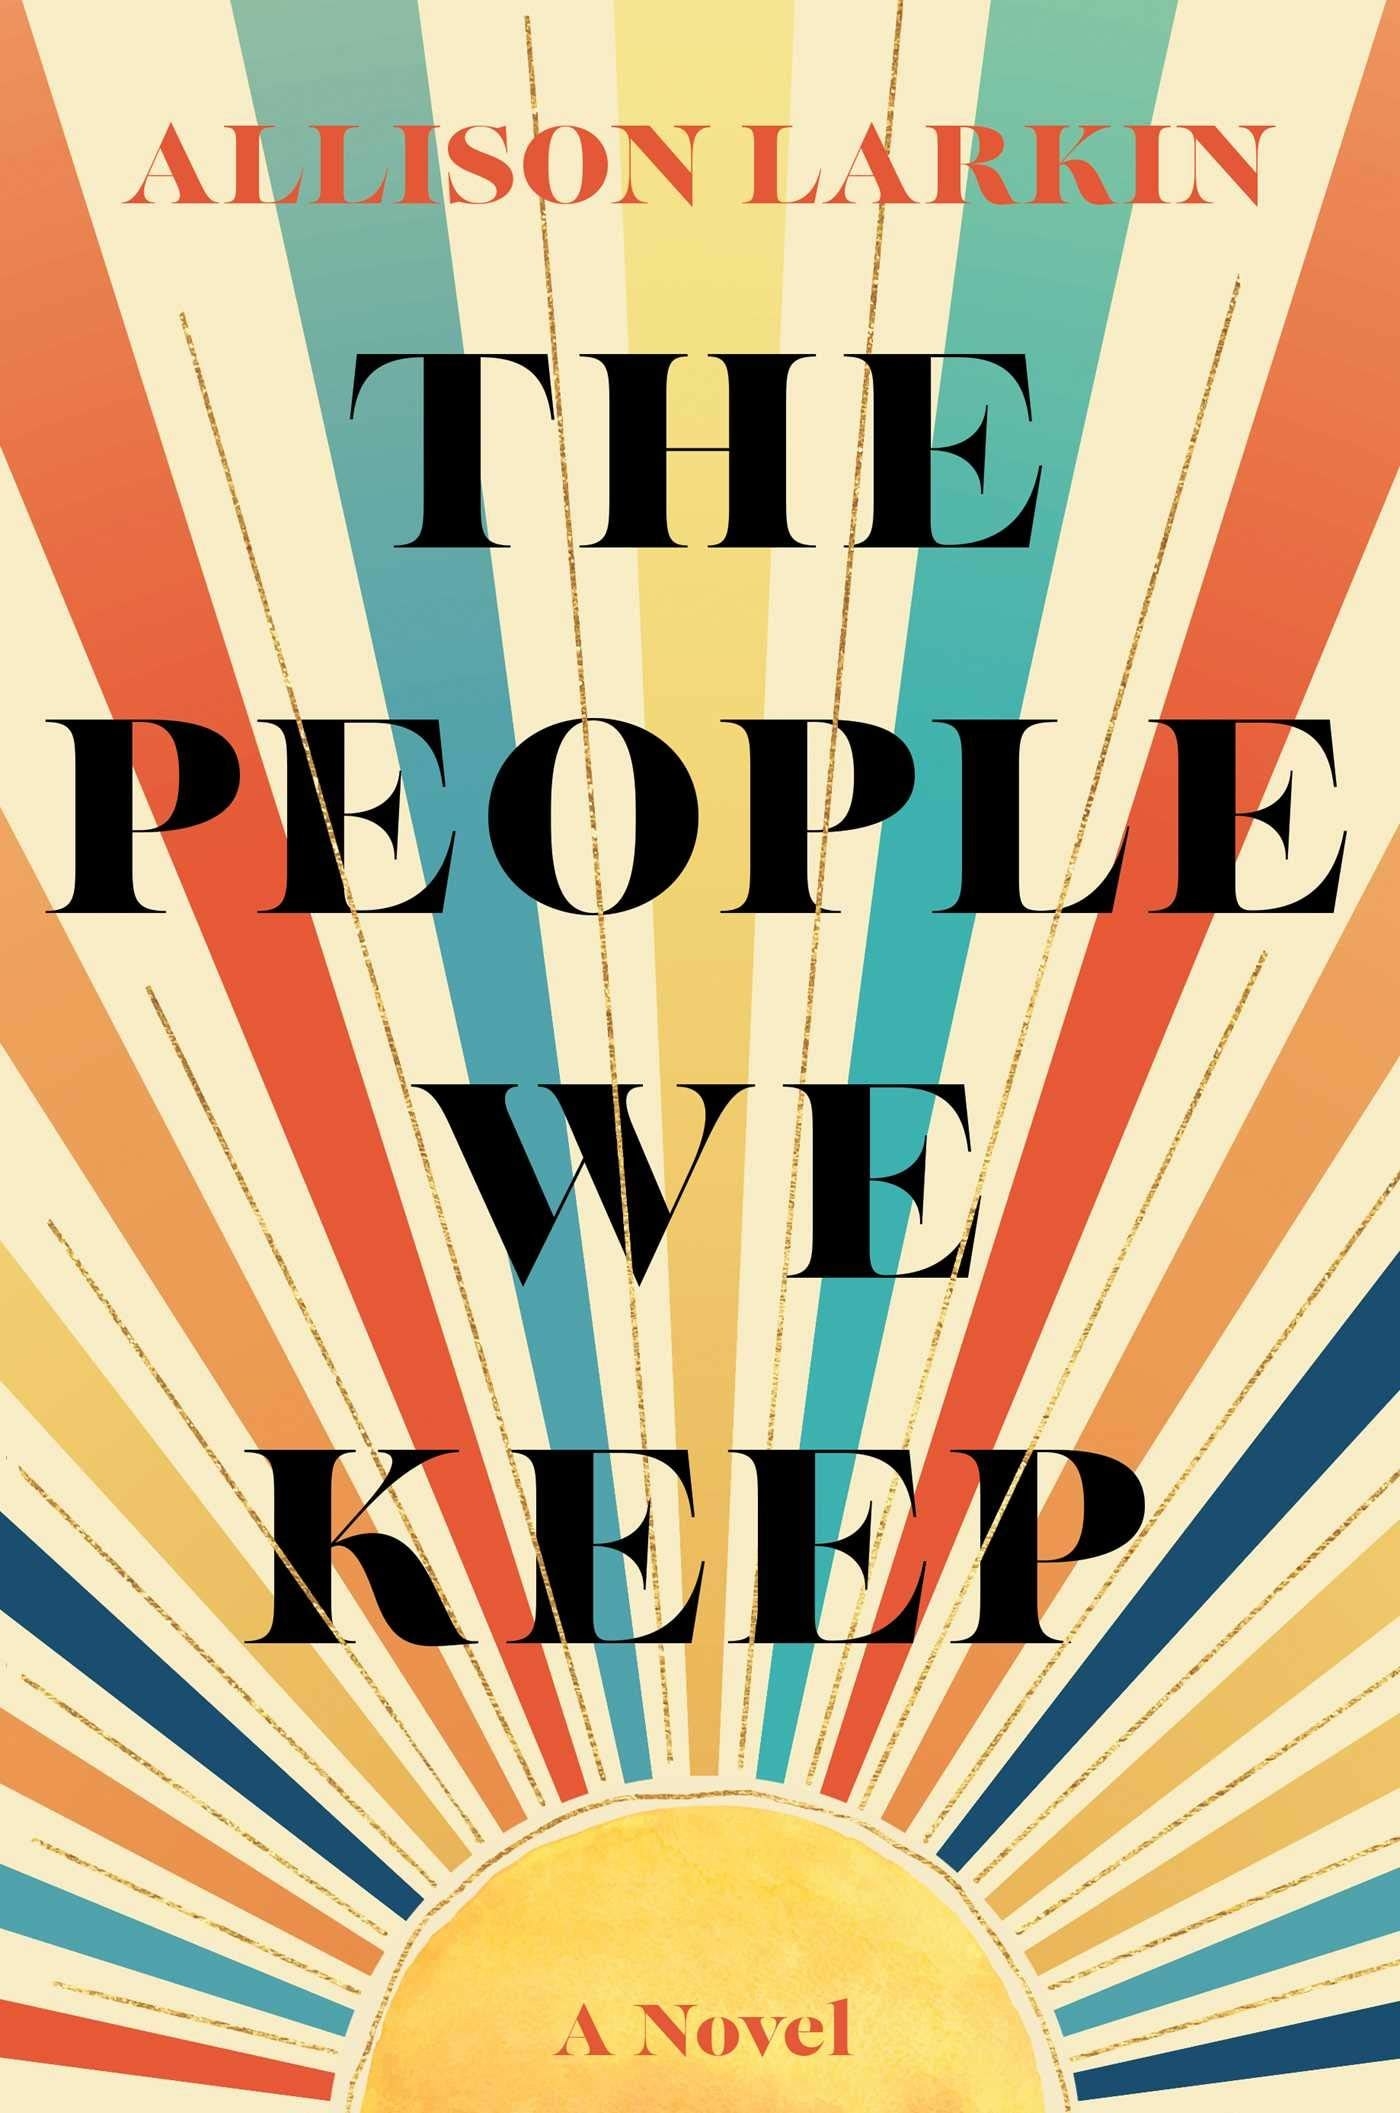 The cover of &quot;The People We Keep&quot; by Allison Larkin.